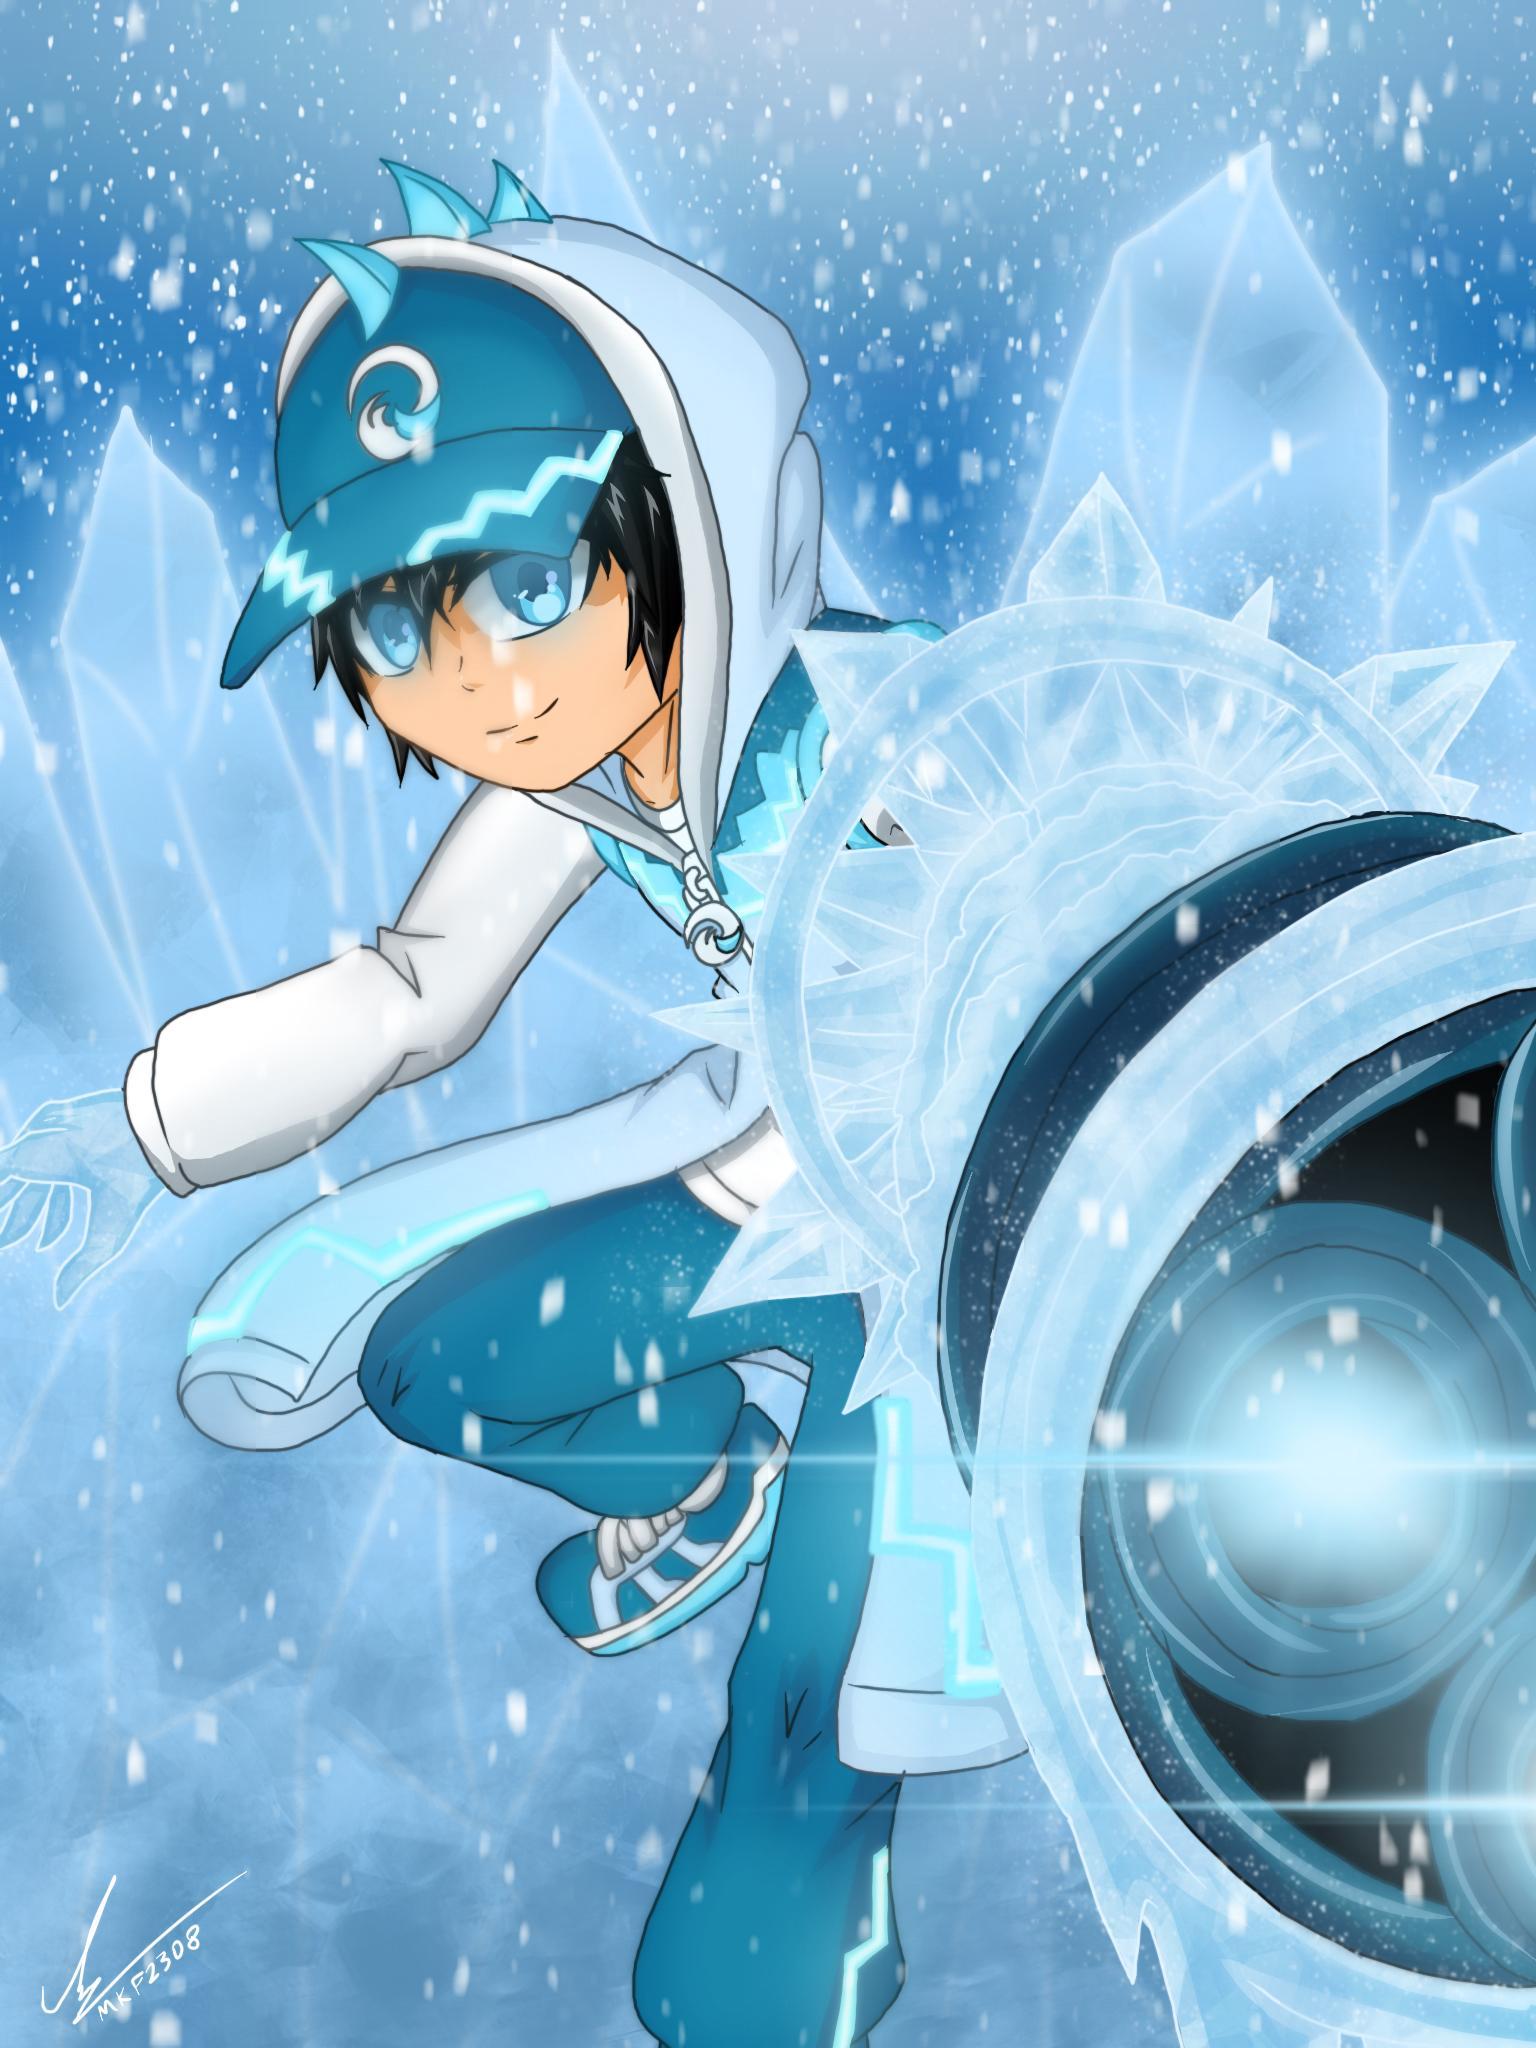 Free download BoBoiBoy Ice by mkf2308 [1536x2048] for your